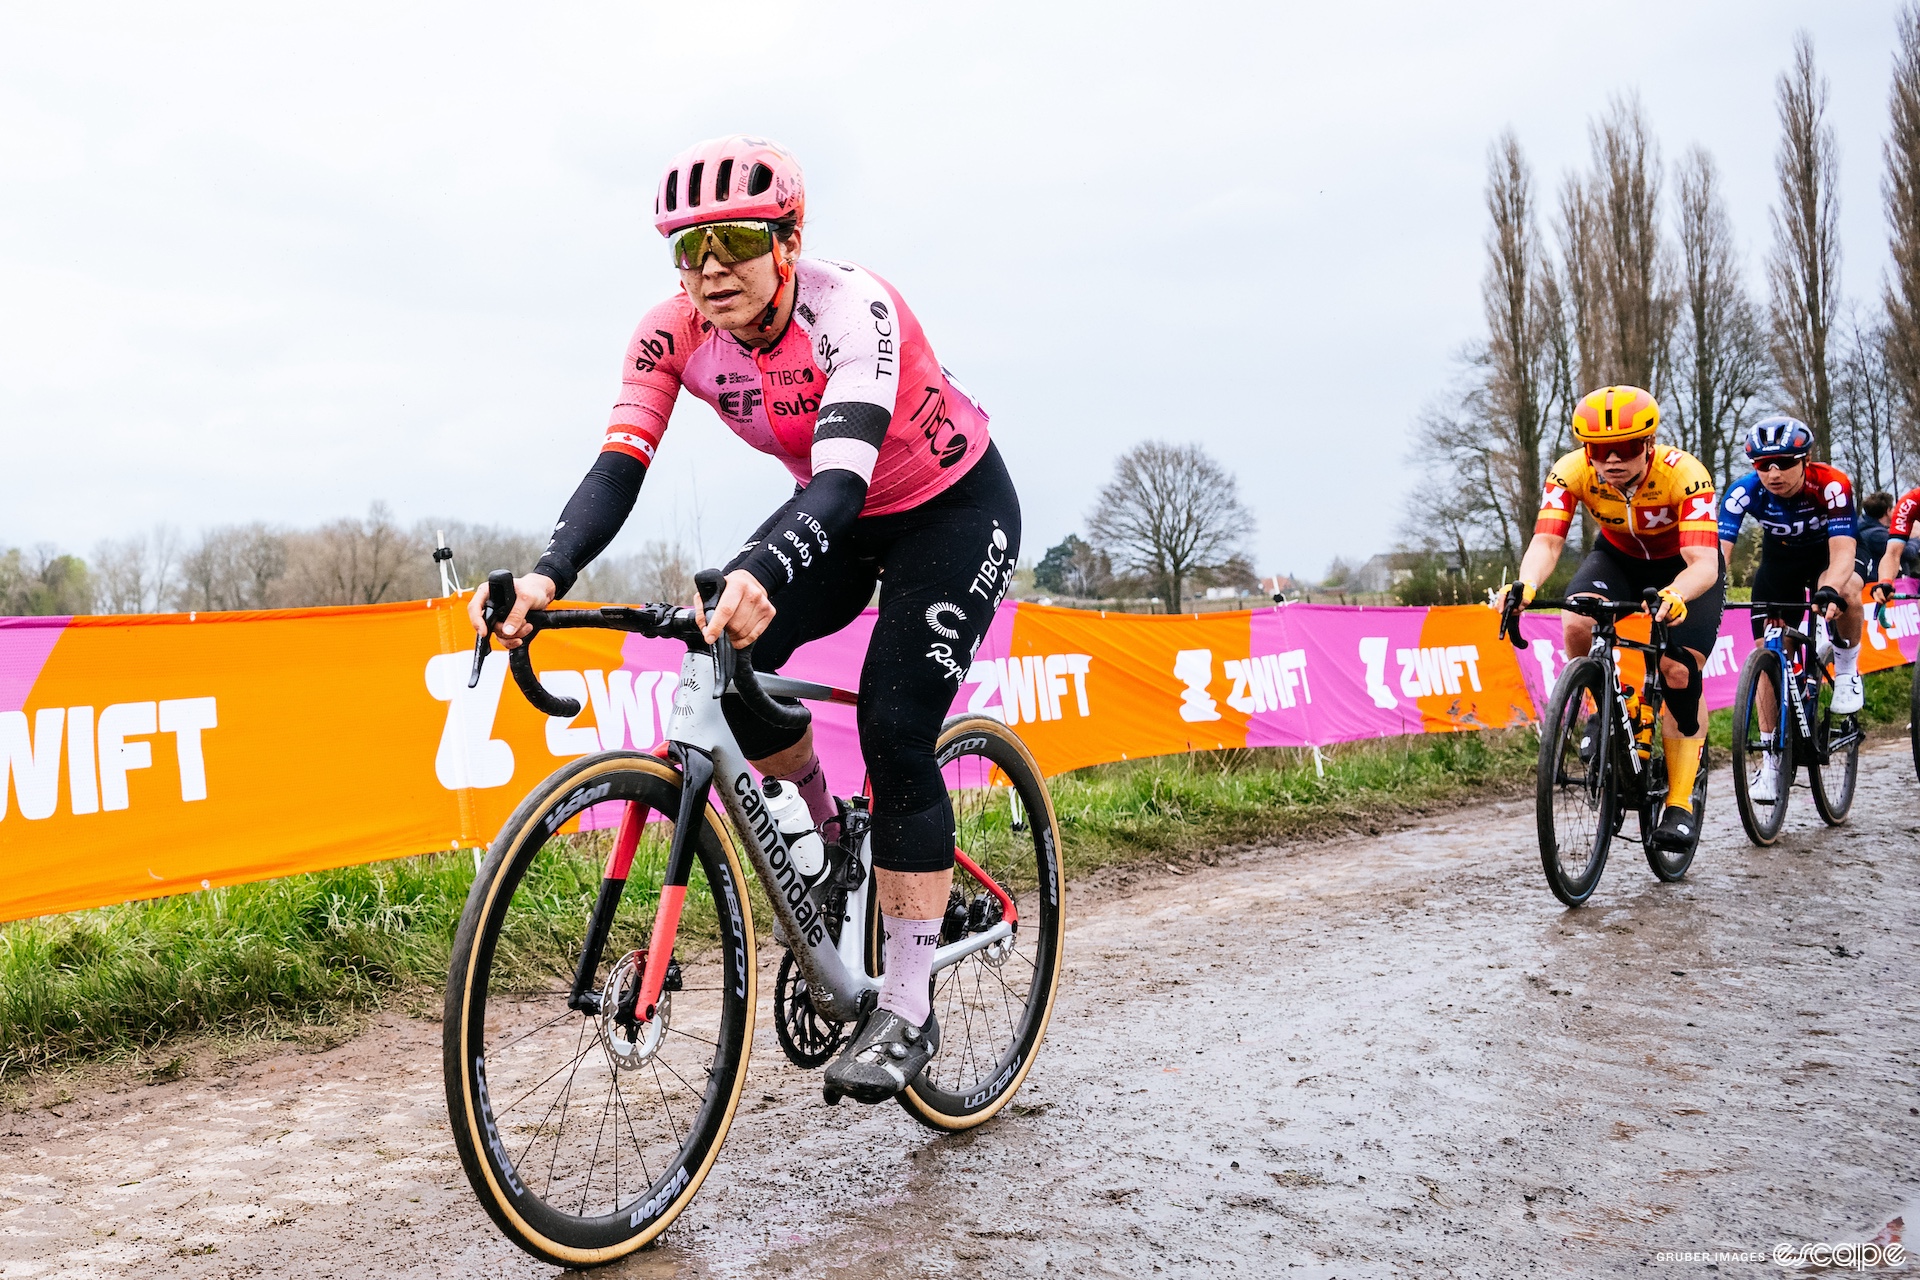 Alison Jackson leads on some wet, muddy cobbles at the 2023 Paris-Roubaix Femmes. She has a slight gap over the riders behind.